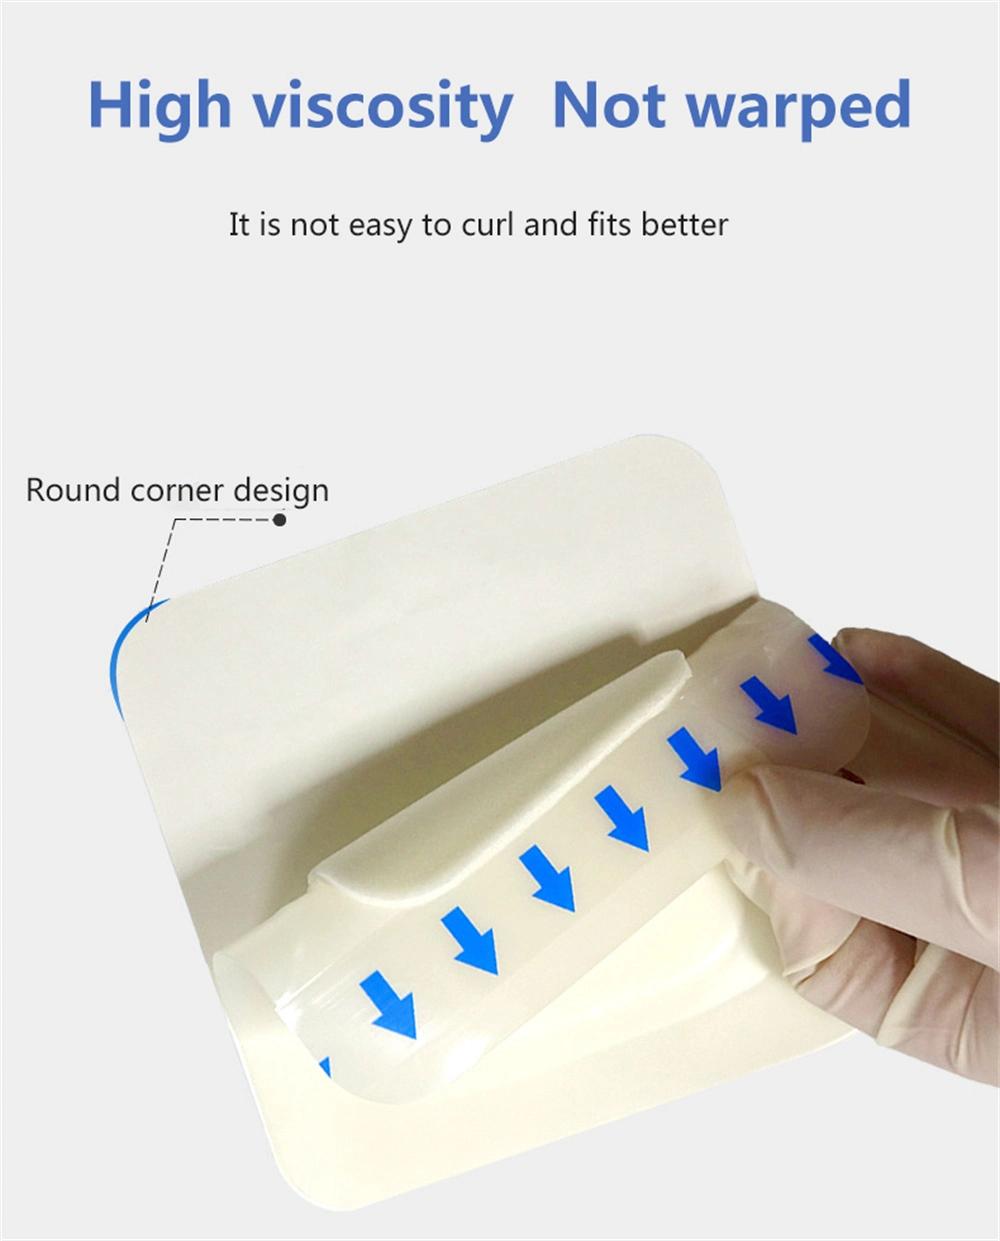 Manufacture Hypoallergenic Self-Adhesive Island Type Silicone Gel Foam Dressing for Wound Care